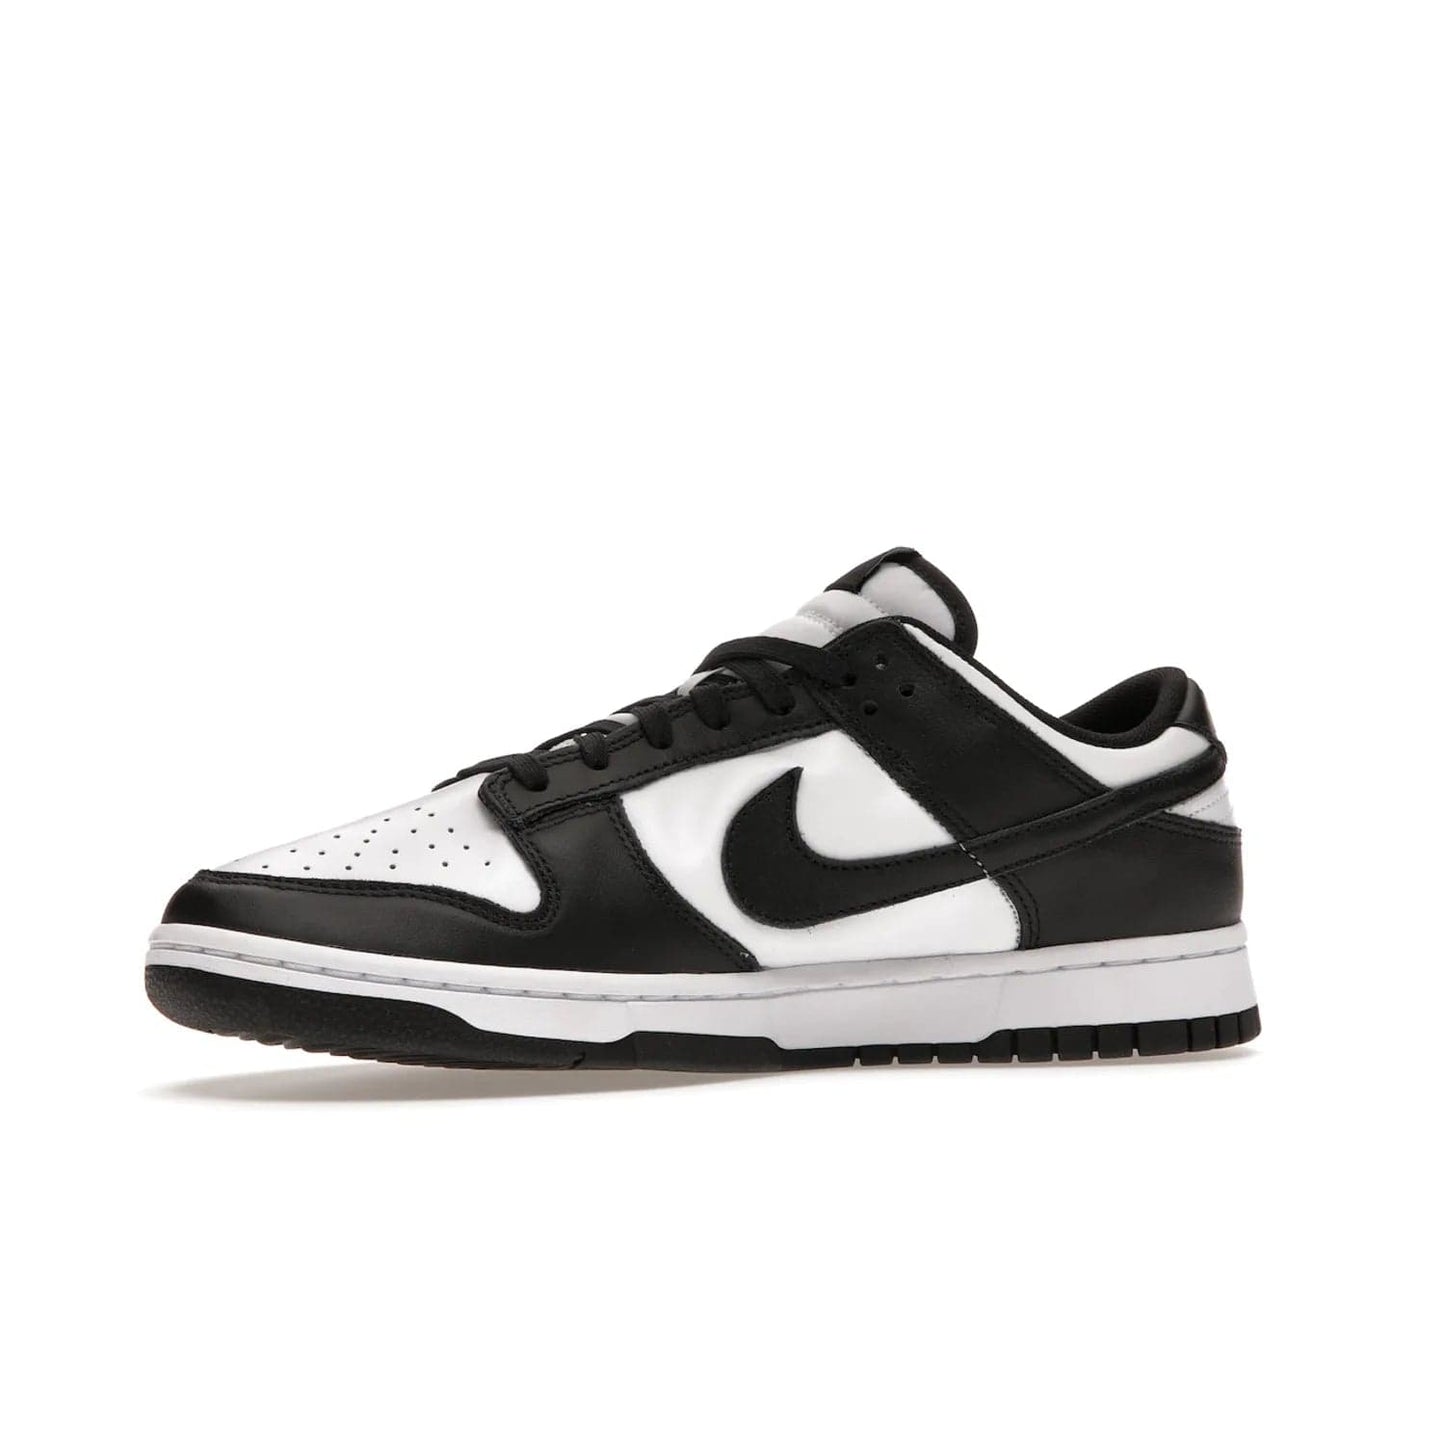 Nike Dunk Low Retro White Black Panda (2021) - Image 17 - Only at www.BallersClubKickz.com - Shop the Nike Dunk Low Retro White Black for classic styling featuring white leather with black leather overlays and classic Nike branding. Released in 2021, this timeless design offers a white midsole and black outsole for a stylish look. Shop all the Nike Dunks & rock this classic look.